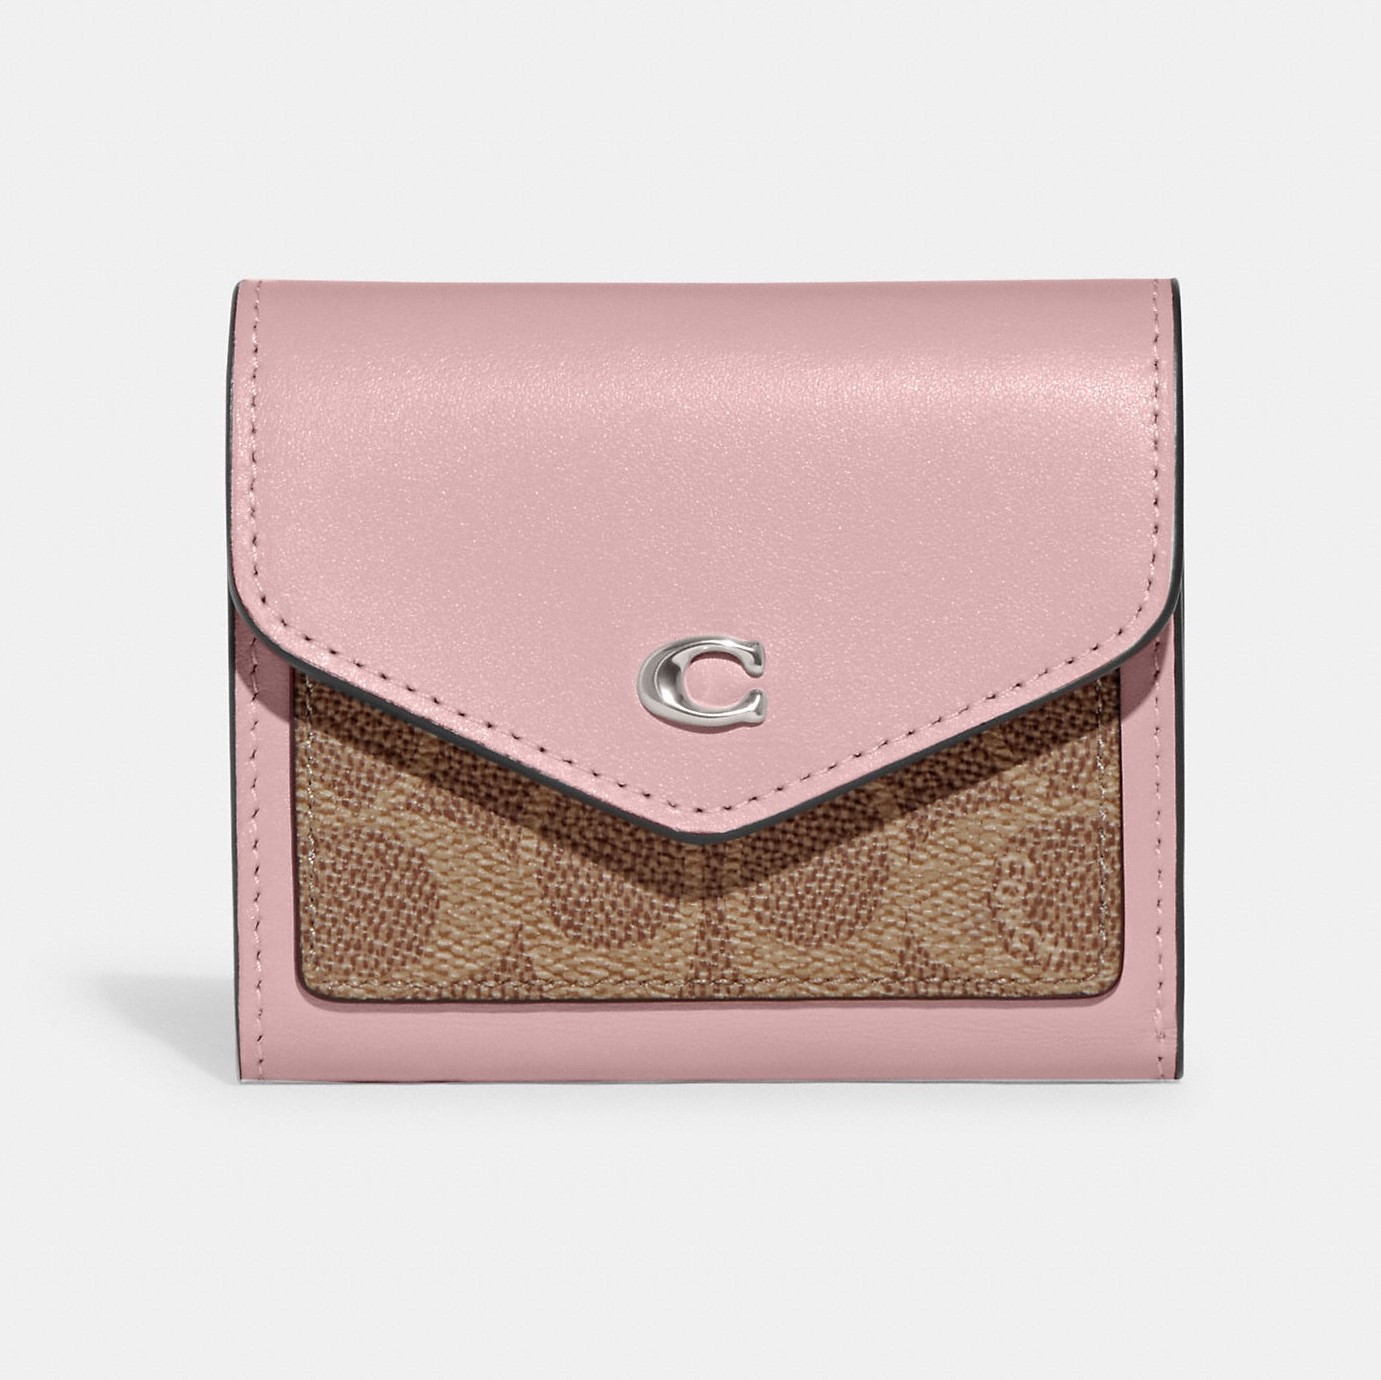 VÍ NỮ NGẮN CẦM TAY COACH WYN SMALL WALLET IN COLORBLOCK SIGNATURE CANVAS CF937 2